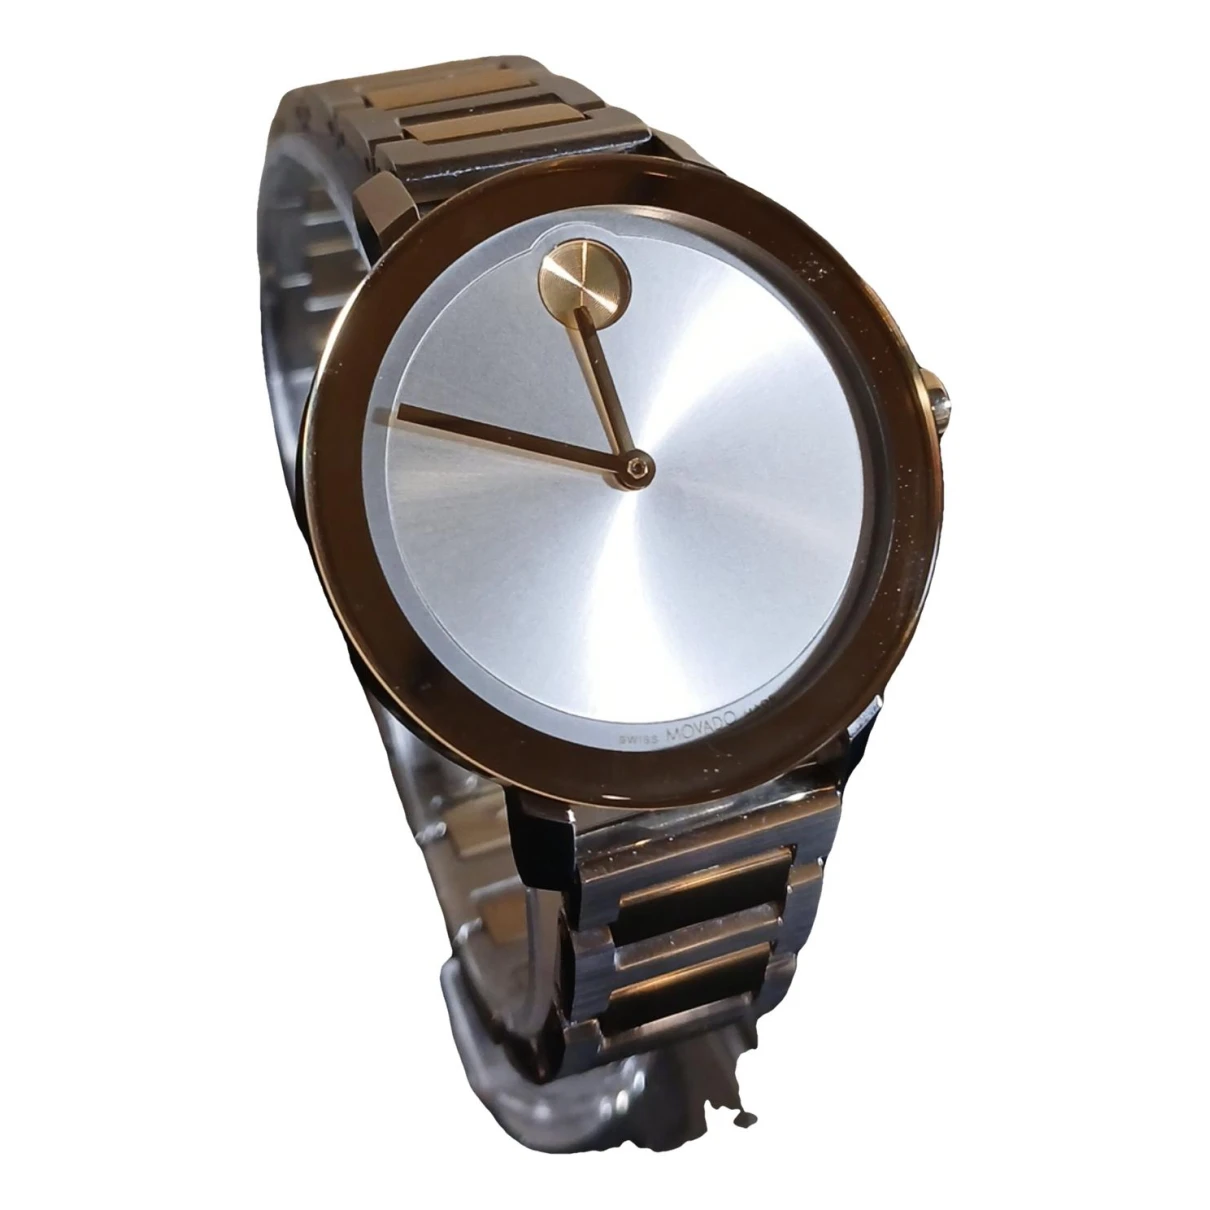 Pre-owned Movado Watch In Gold